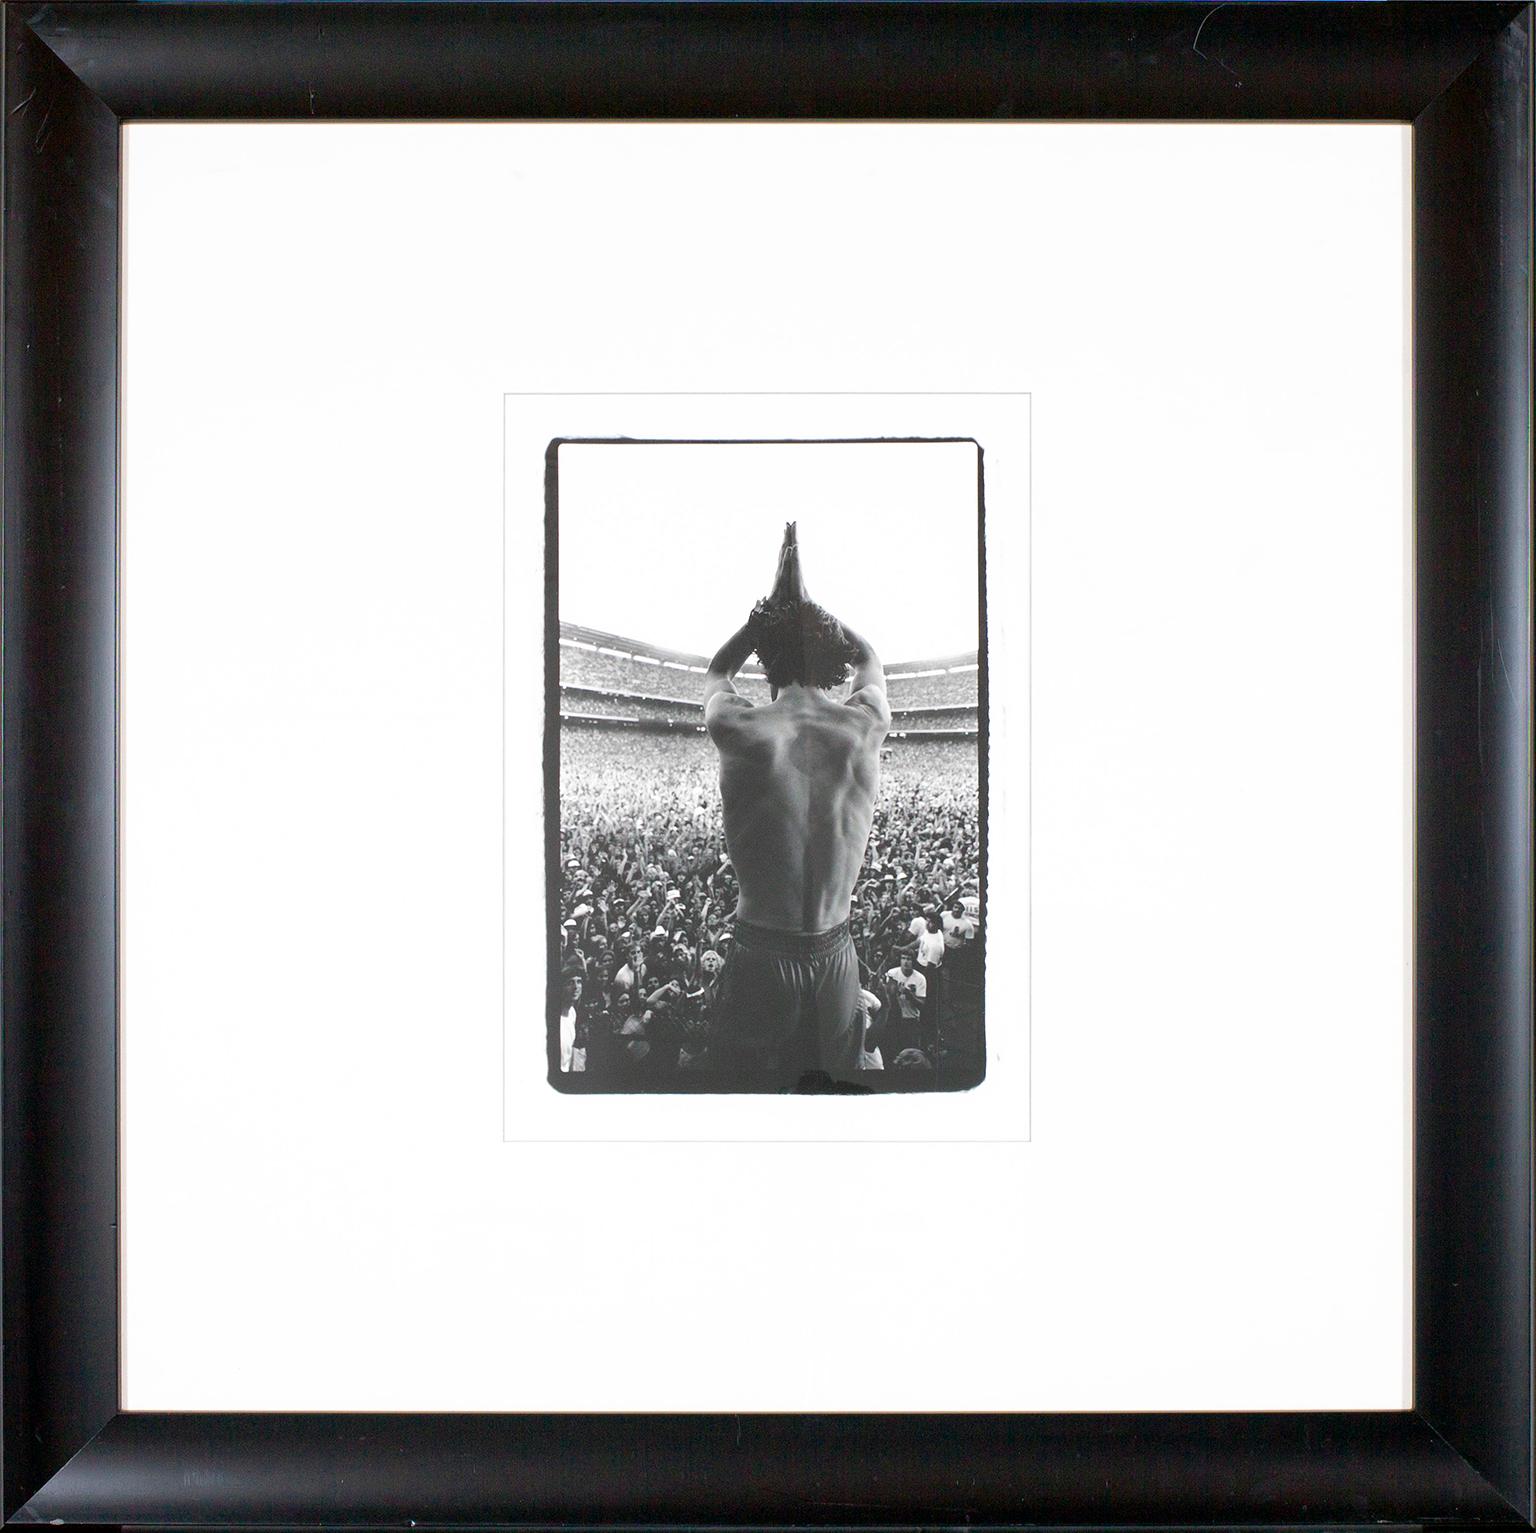 "Mick Jagger 'The Back'" framed black and white photograph by Lynn Goldsmith. Image size: 16 x 11 inches. This photograph was previously displayed in a guest room of the original Hard Rock Hotel and Casino in Las Vegas, Nevada, and comes with a